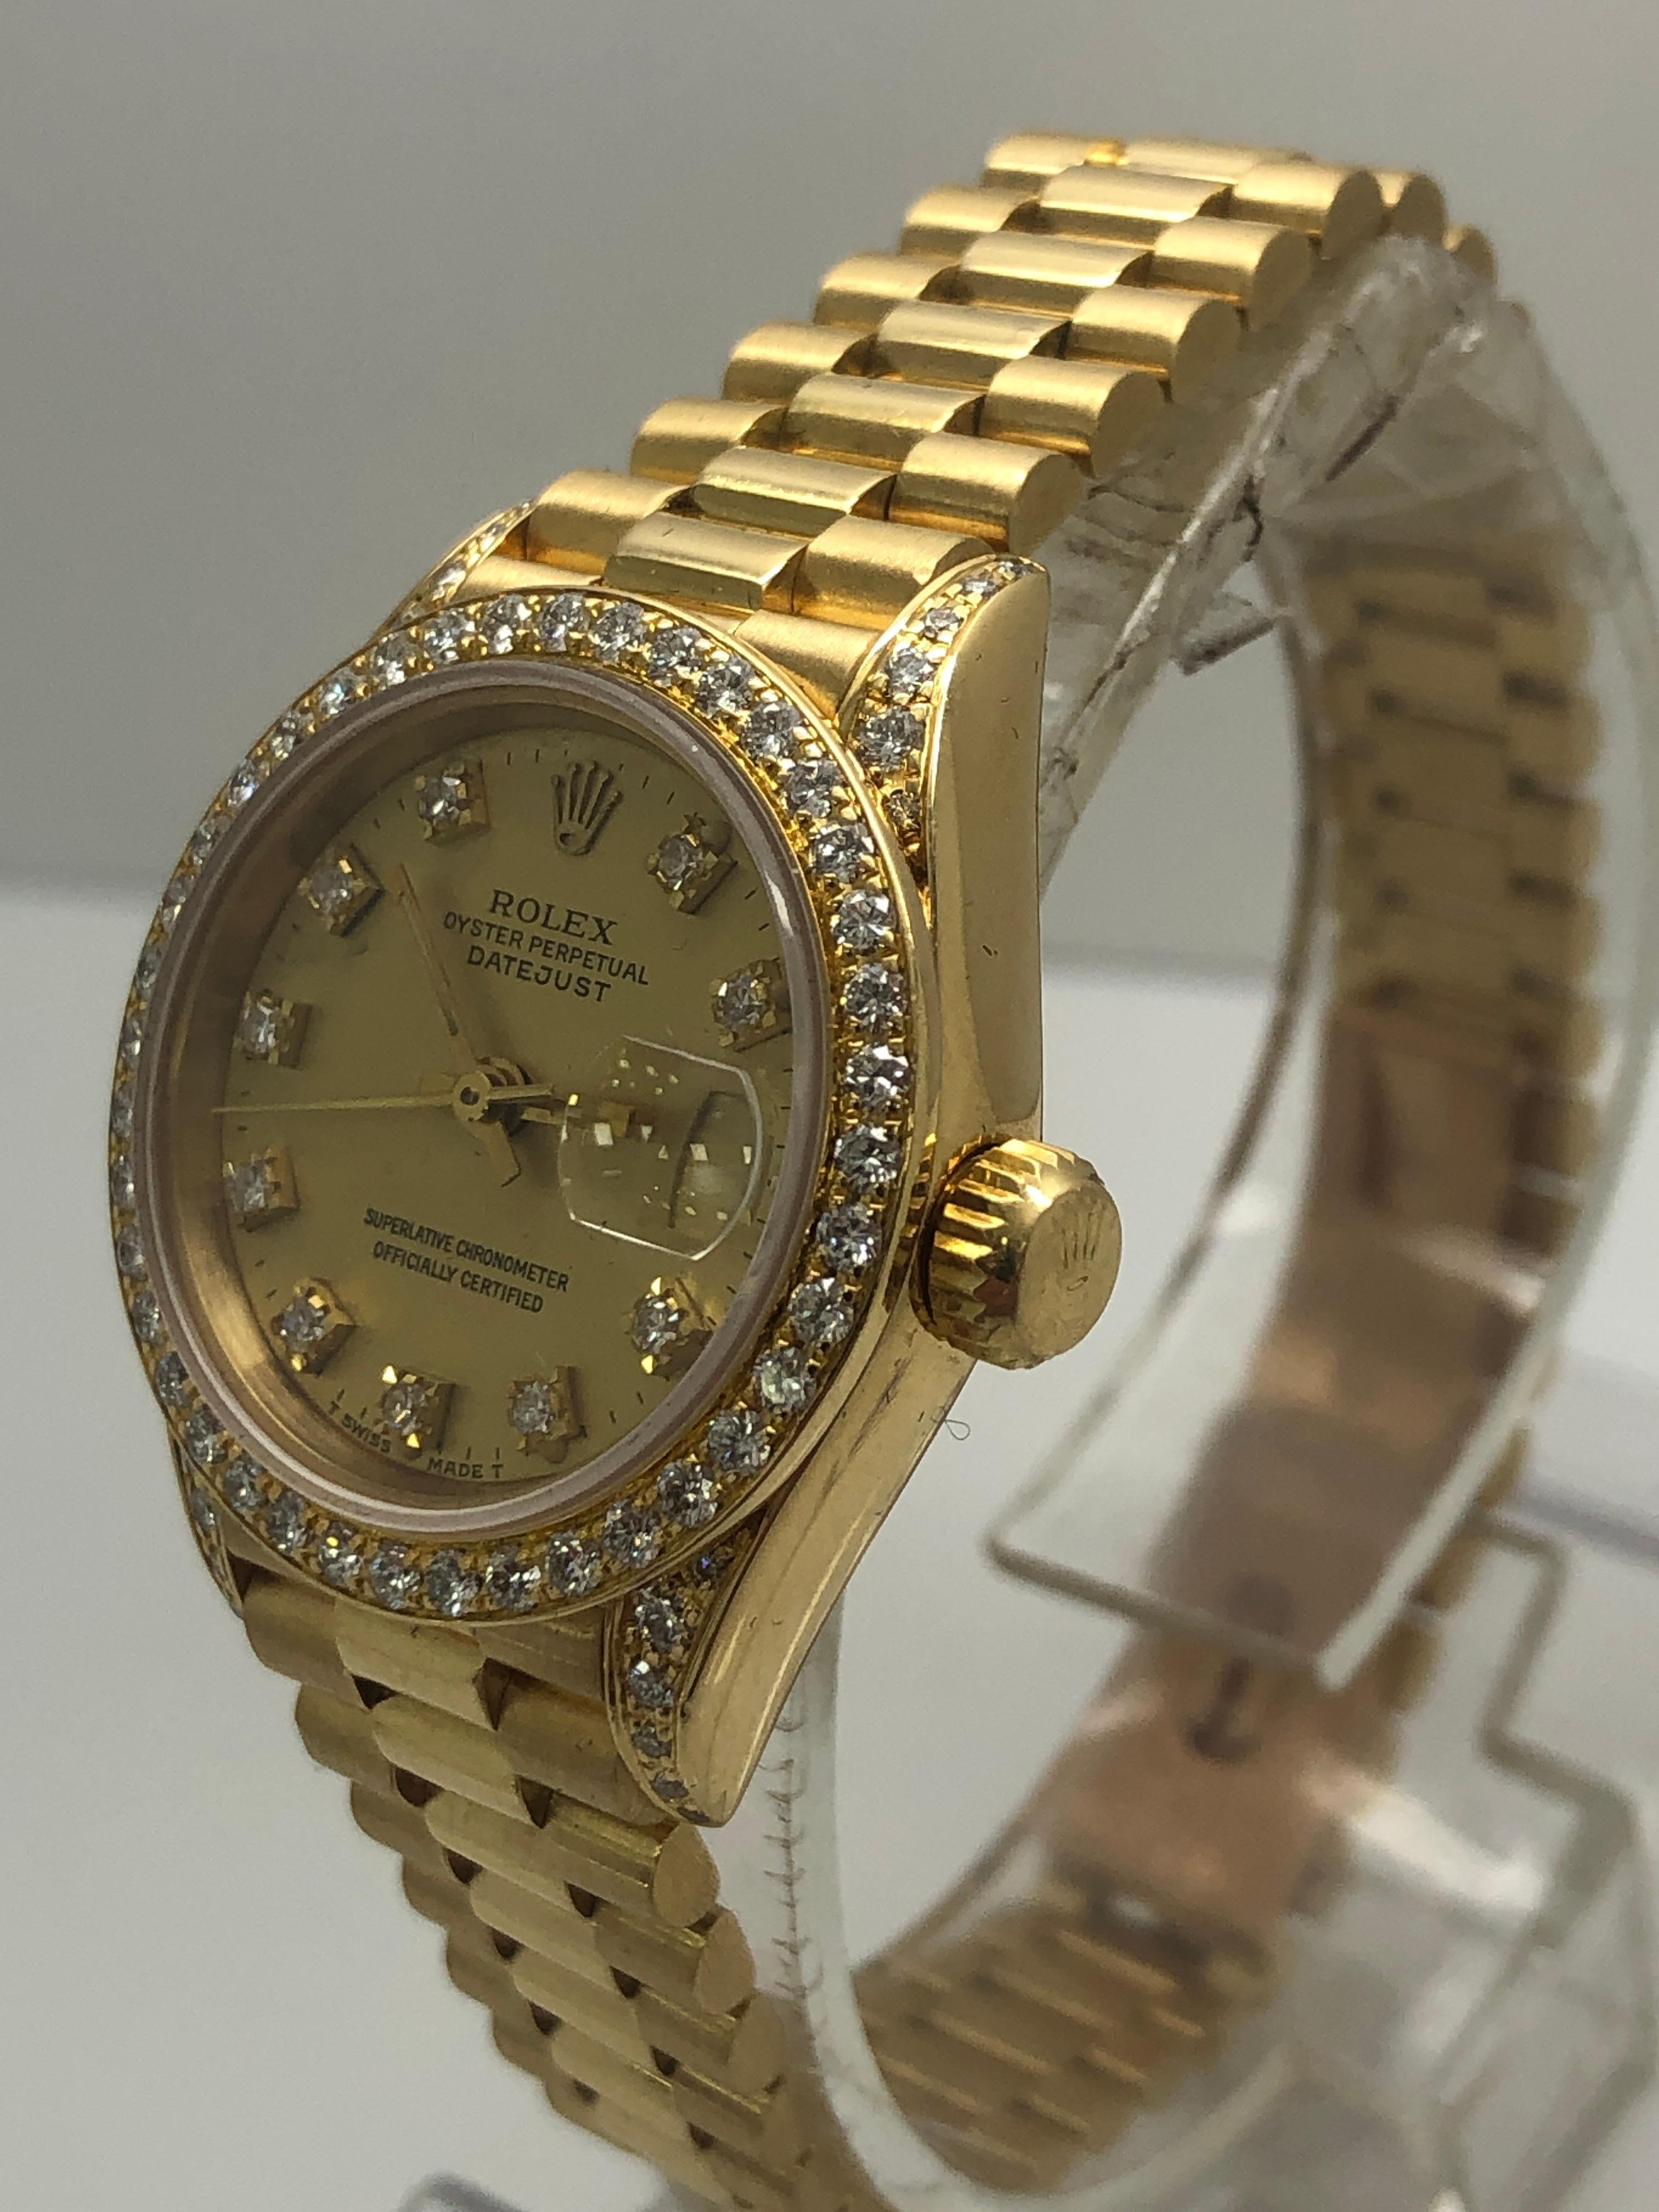 Rolex Datejust Ladies Original Diamond Watch

very good condition- runs perfect

all original including diamonds from Rolex

free overnight shipping

shop with confidence